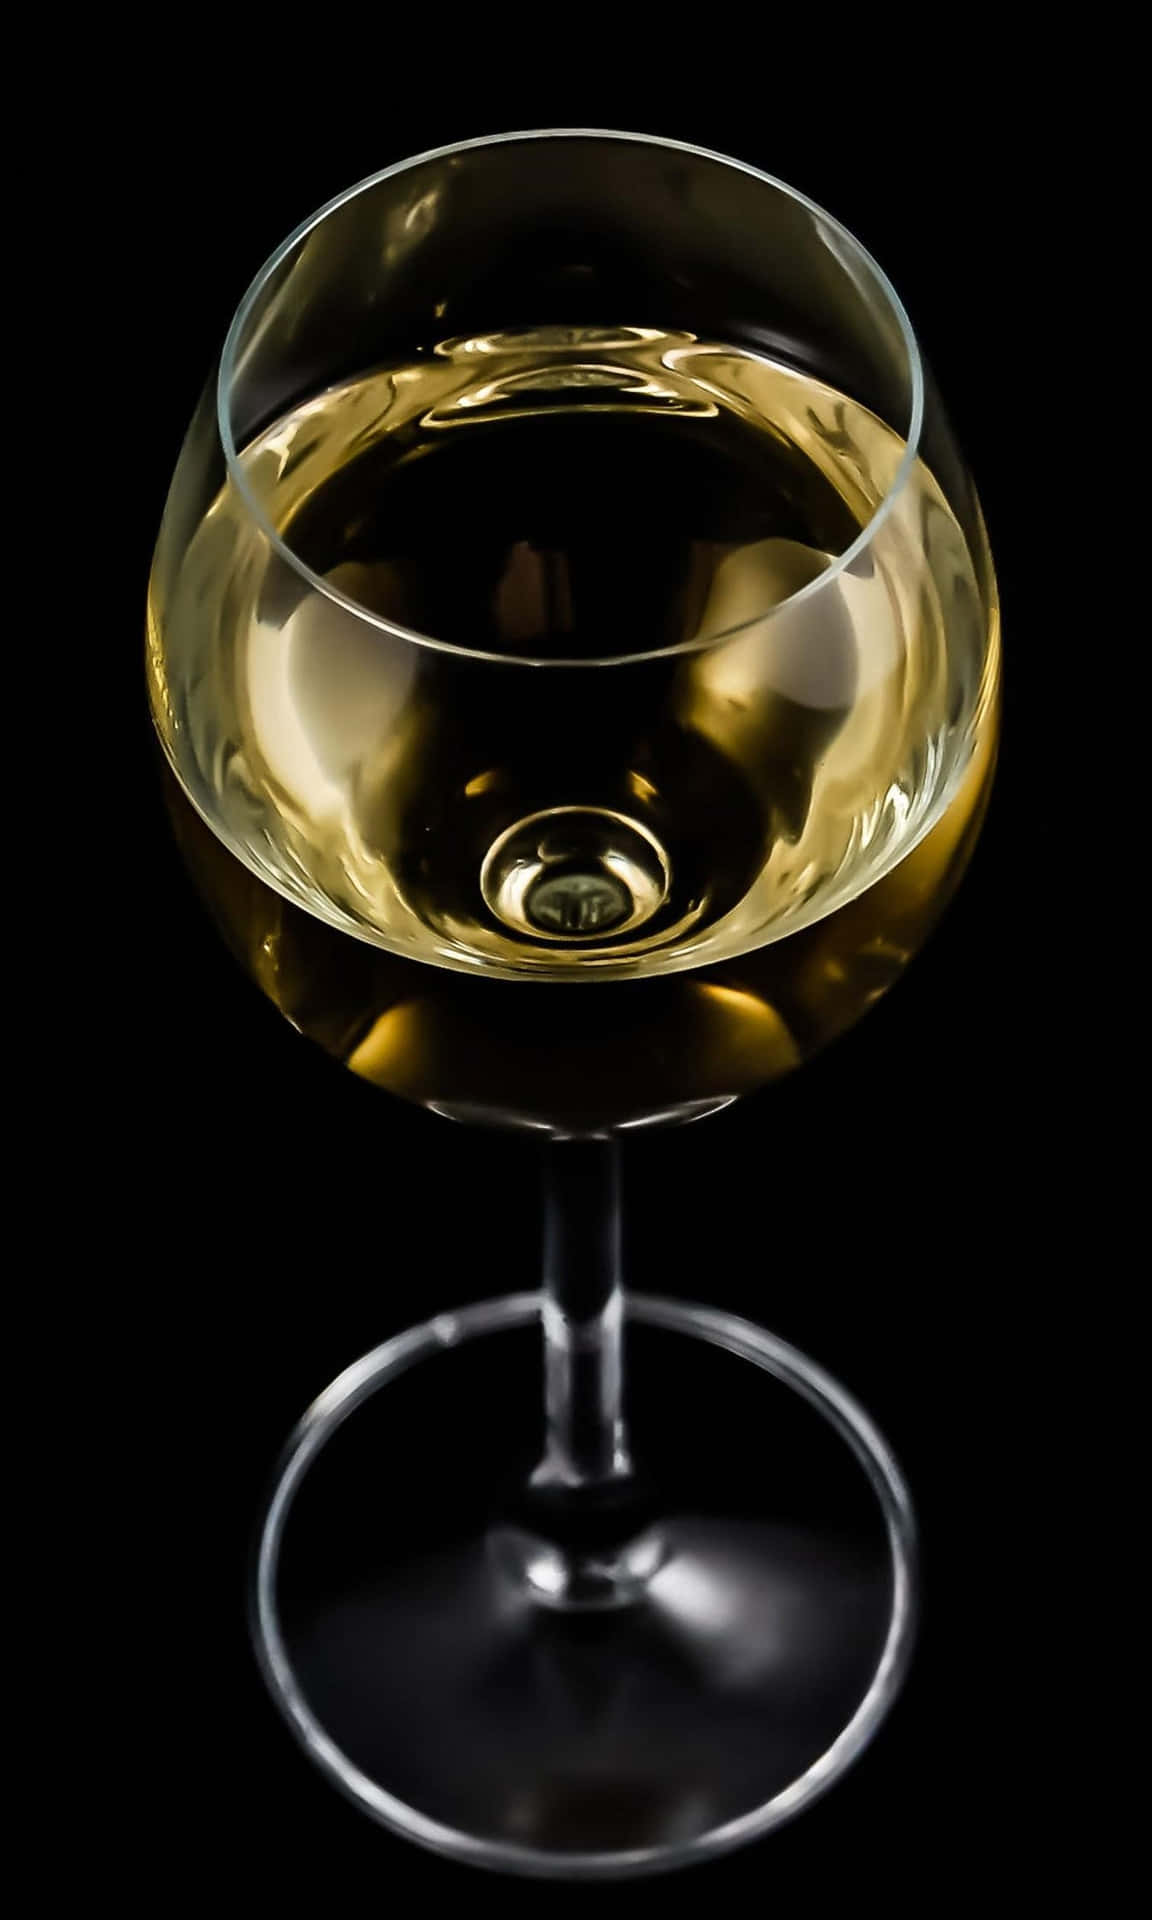 A glass of white wine to start your evening, the perfect way to relax. Wallpaper